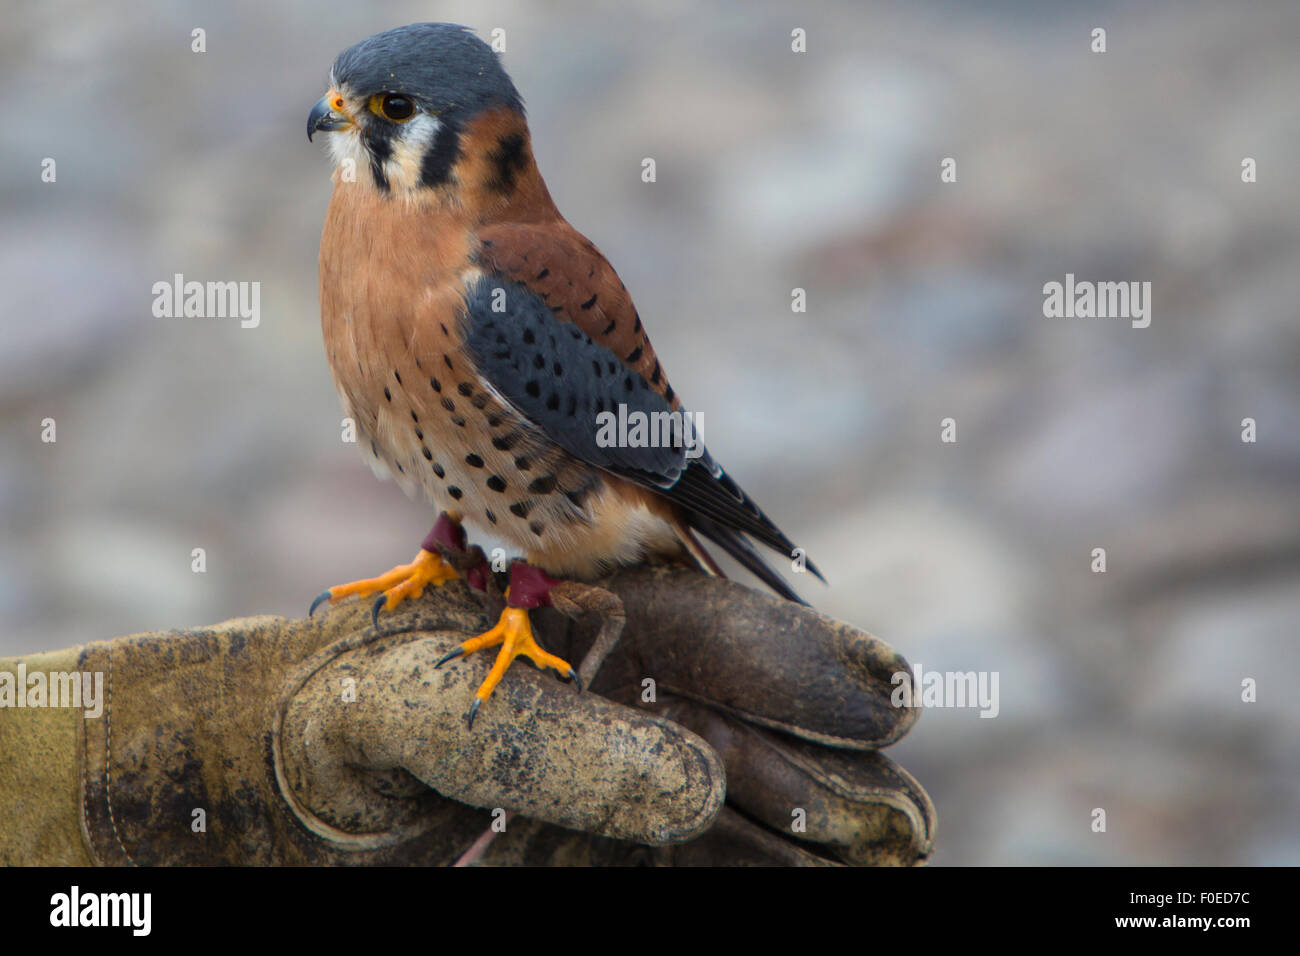 American Kestrel standing on the leather glove of his trainer at an Andean bird sanctuary near Otavalo, Ecuador 2015 Stock Photo